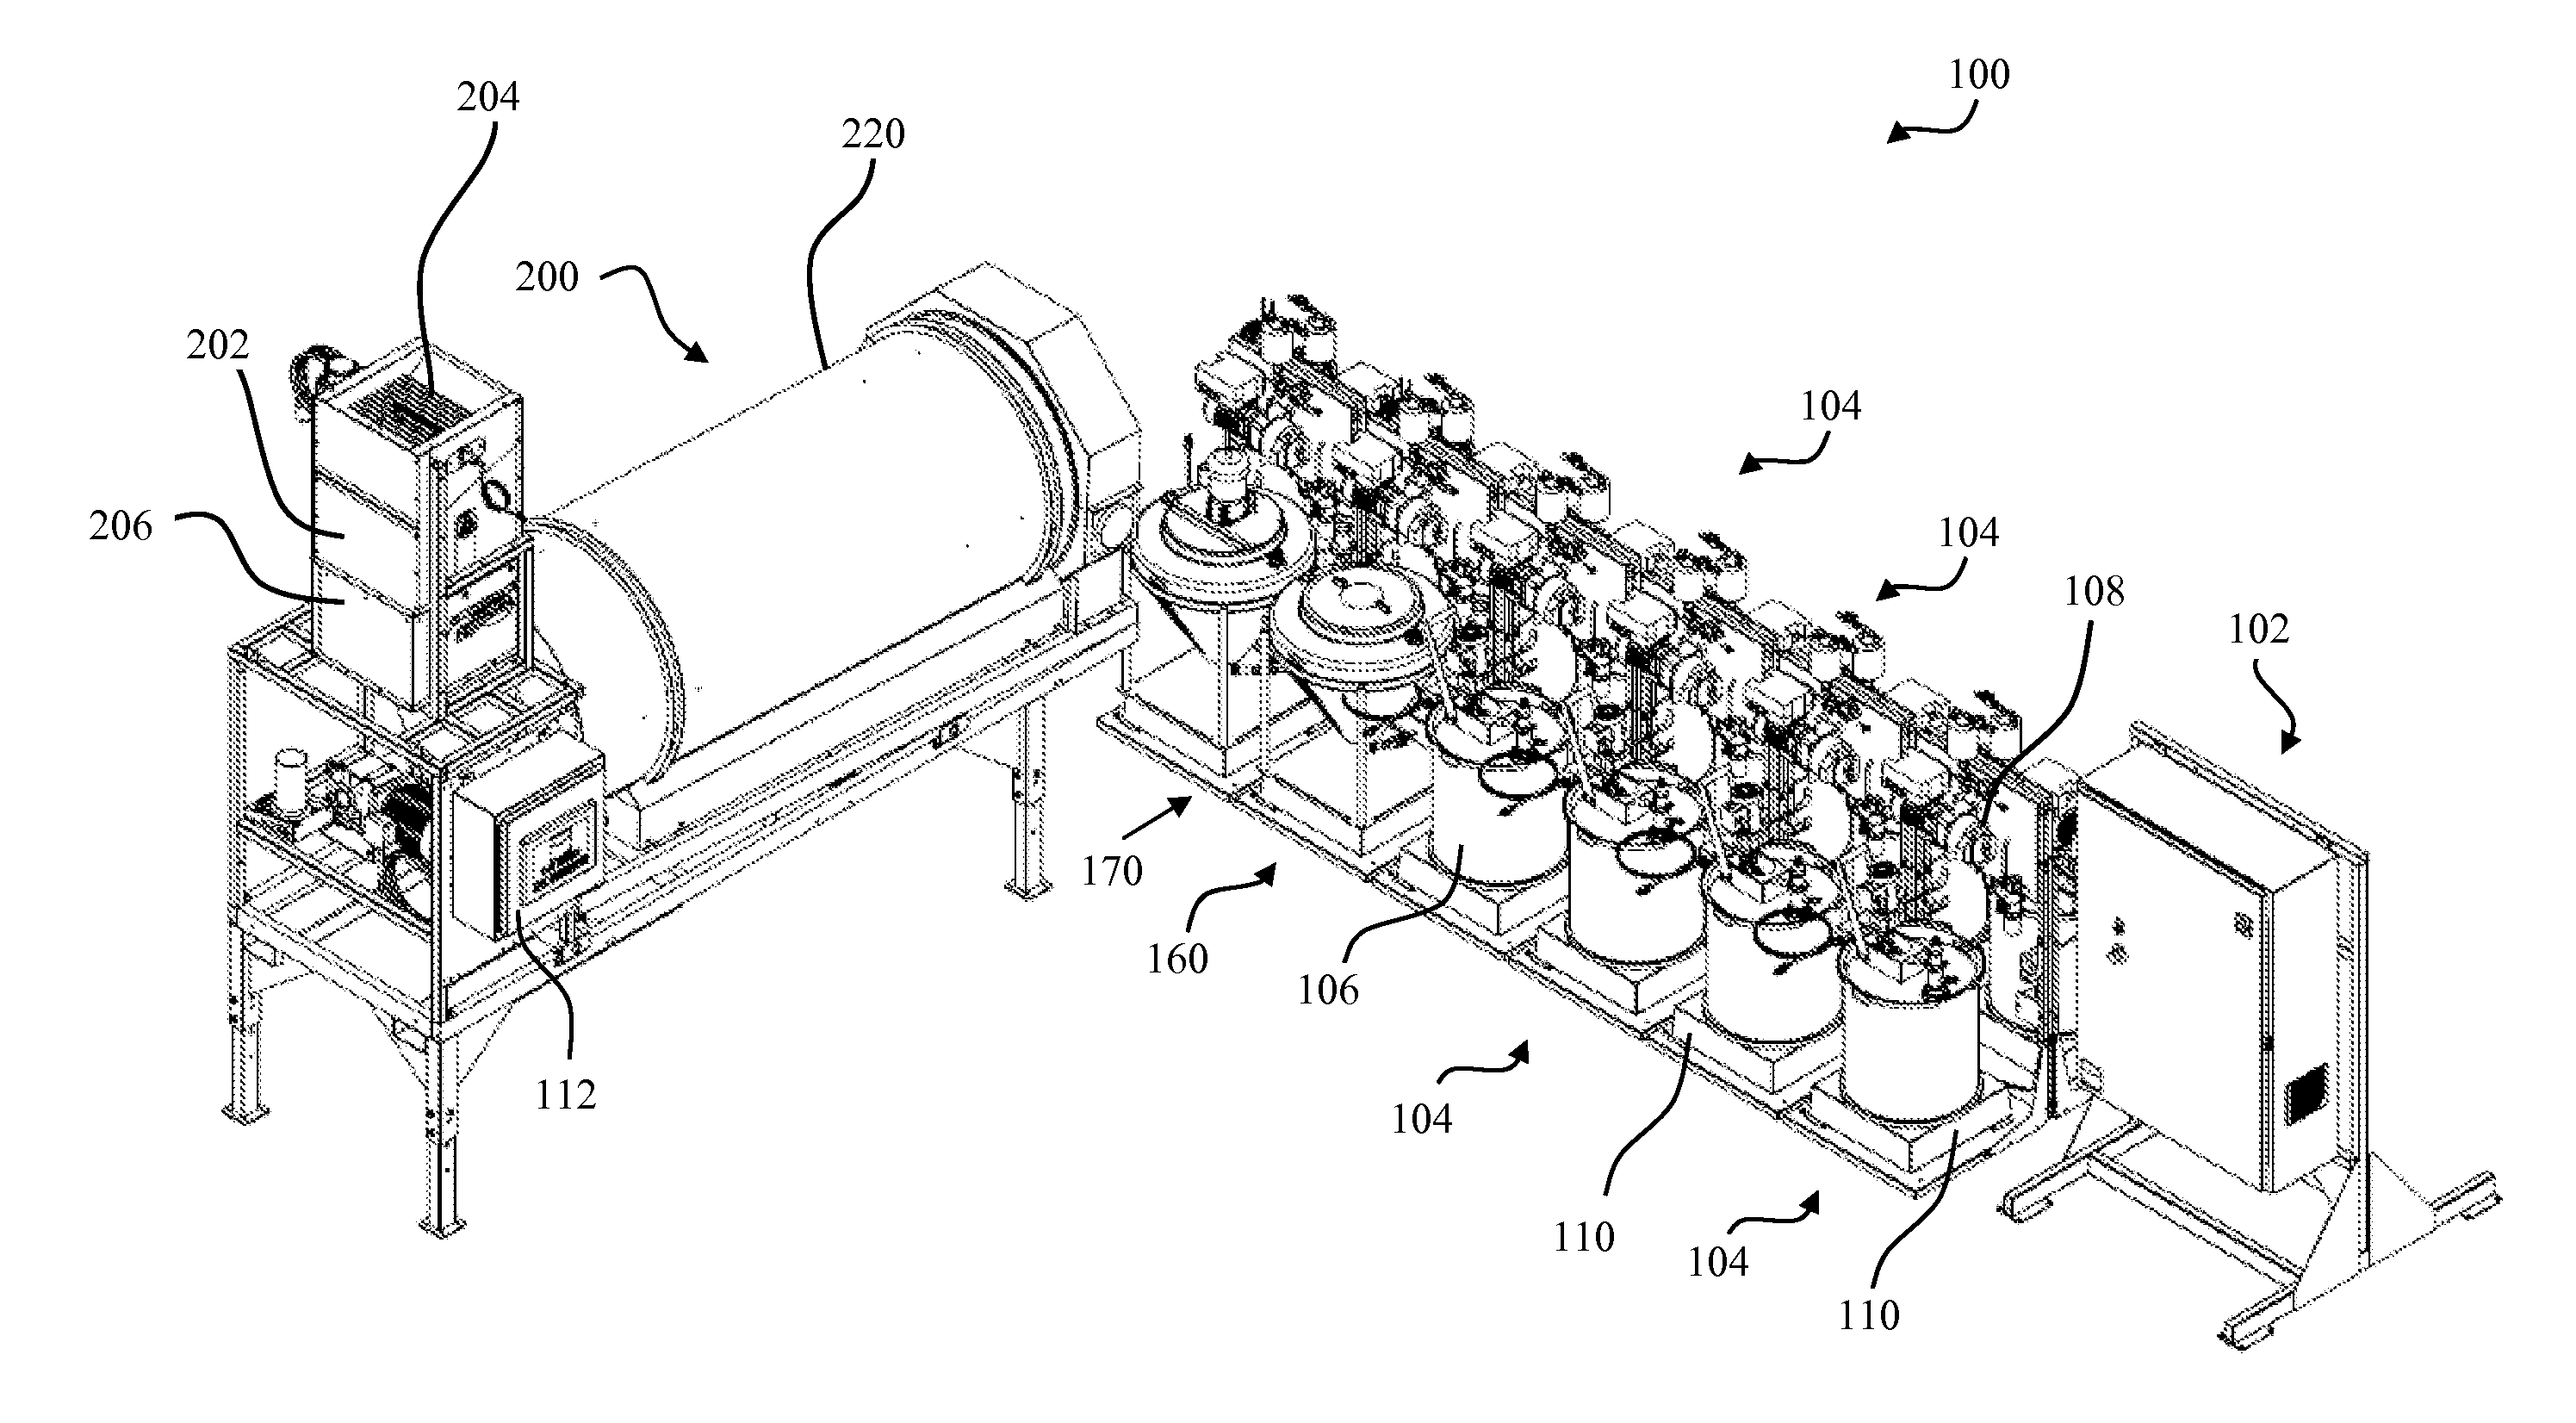 Seed treatment facilities, methods and apparatus